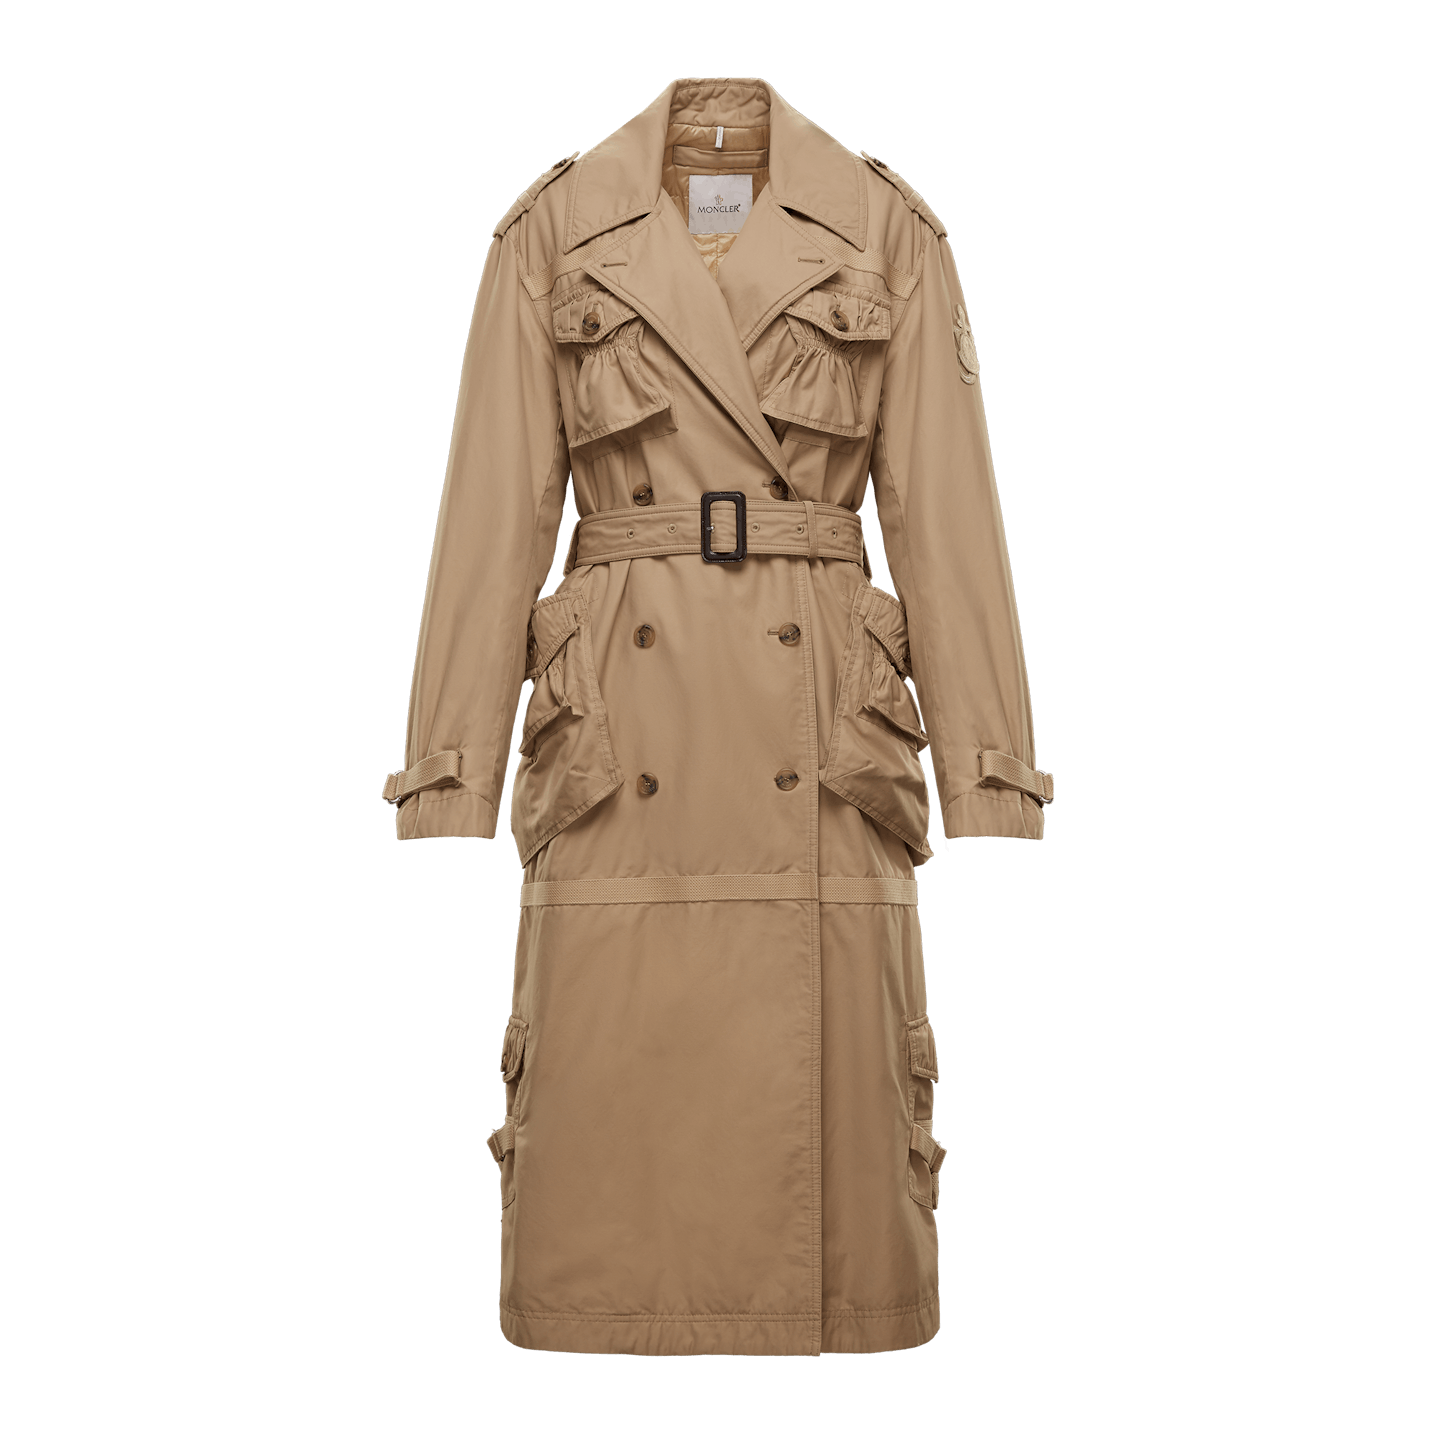 1 Moncler JW Anderson, Trench Coat, £1,315